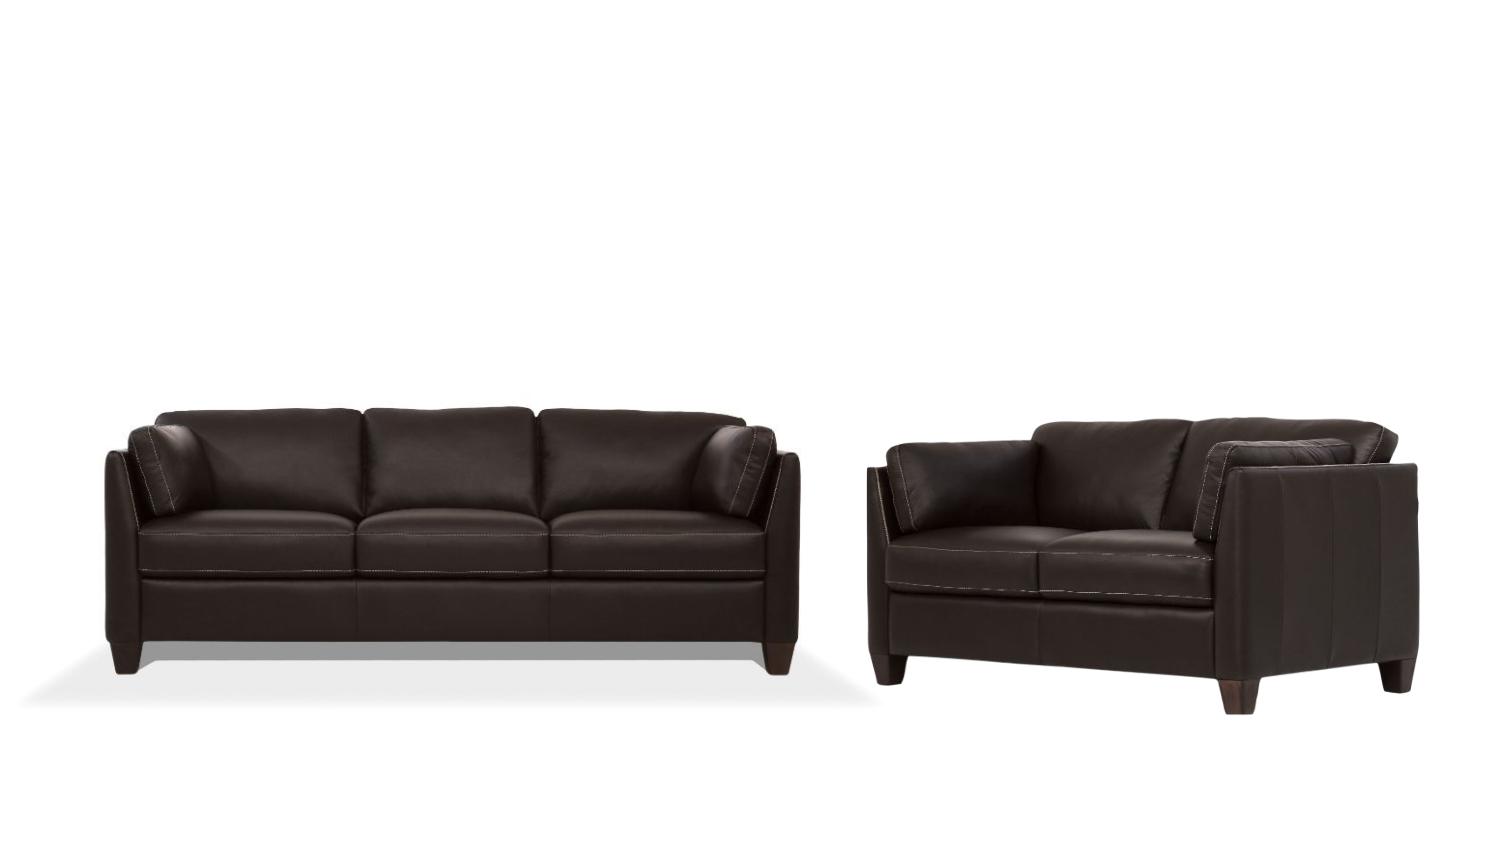 Modern, Transitional Sofa and Loveseat Set Matias 55010-2pcs in Chocolate Leather